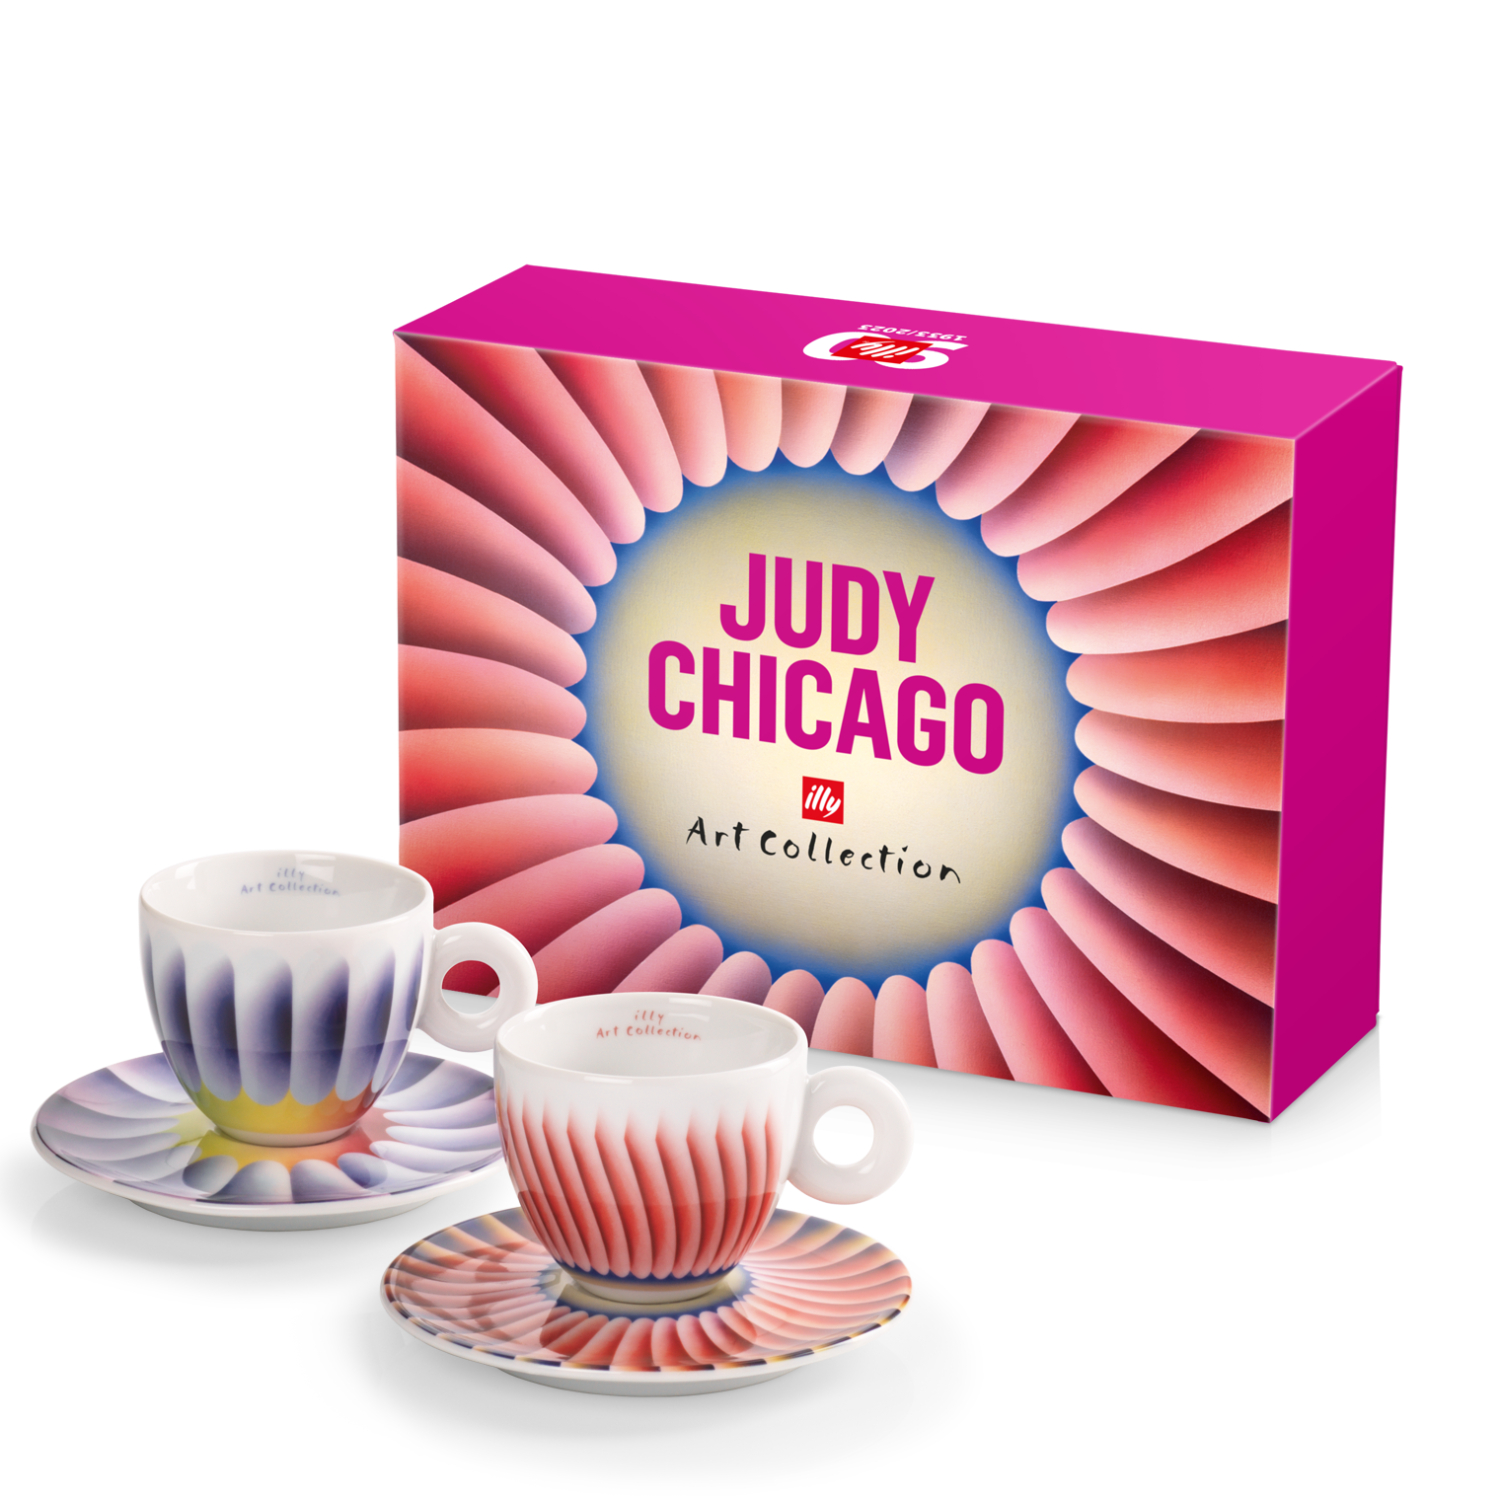 illy Art Collection JUDY CHICAGO Gift Set 2 Cappuccino Cups, Cups, 02-02-2016